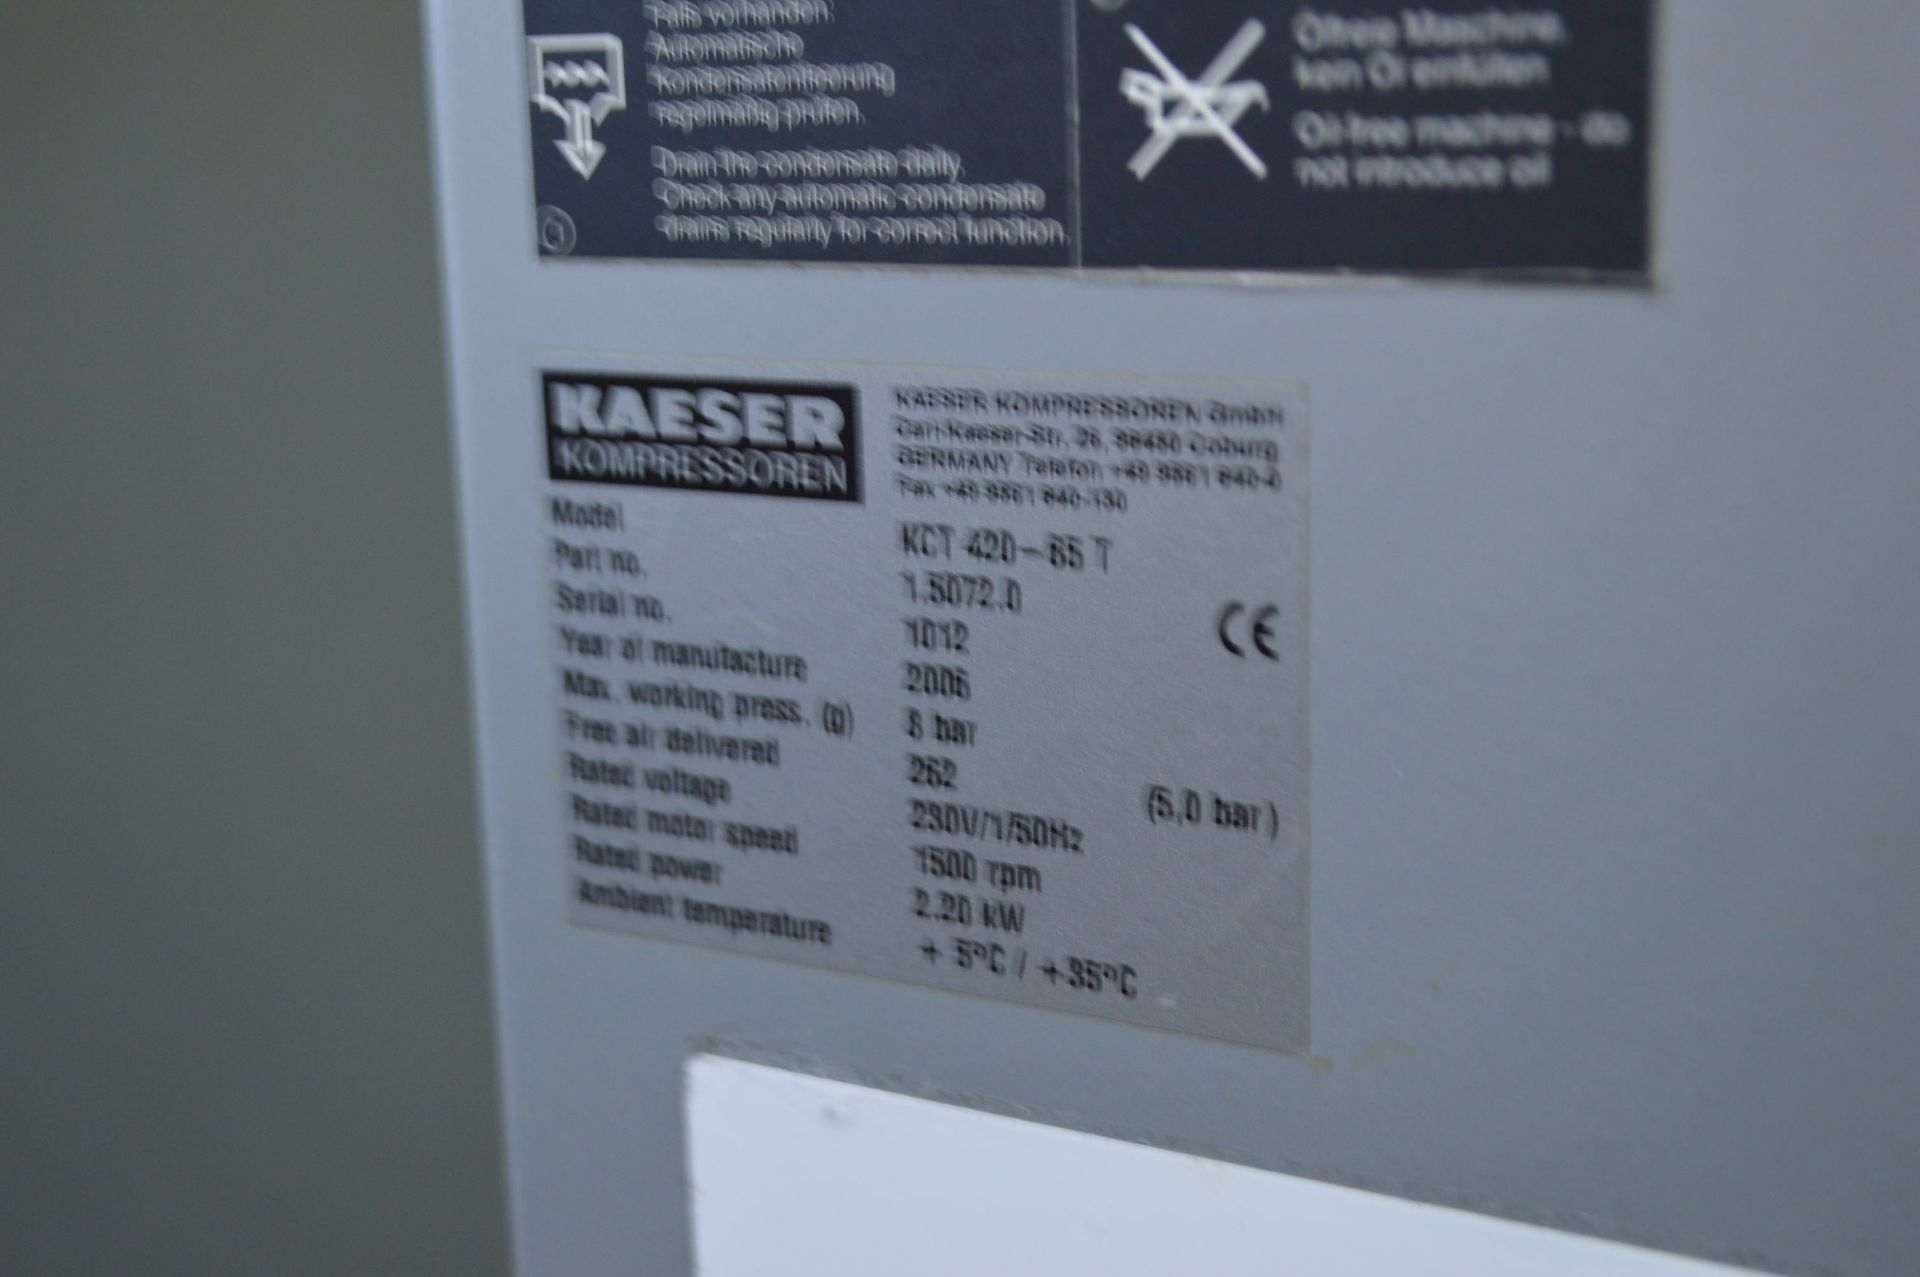 Kaeser KCT420-65T Package Air Compressor, serial no. 1012, year of manufacture 2006. This lot must - Image 2 of 2